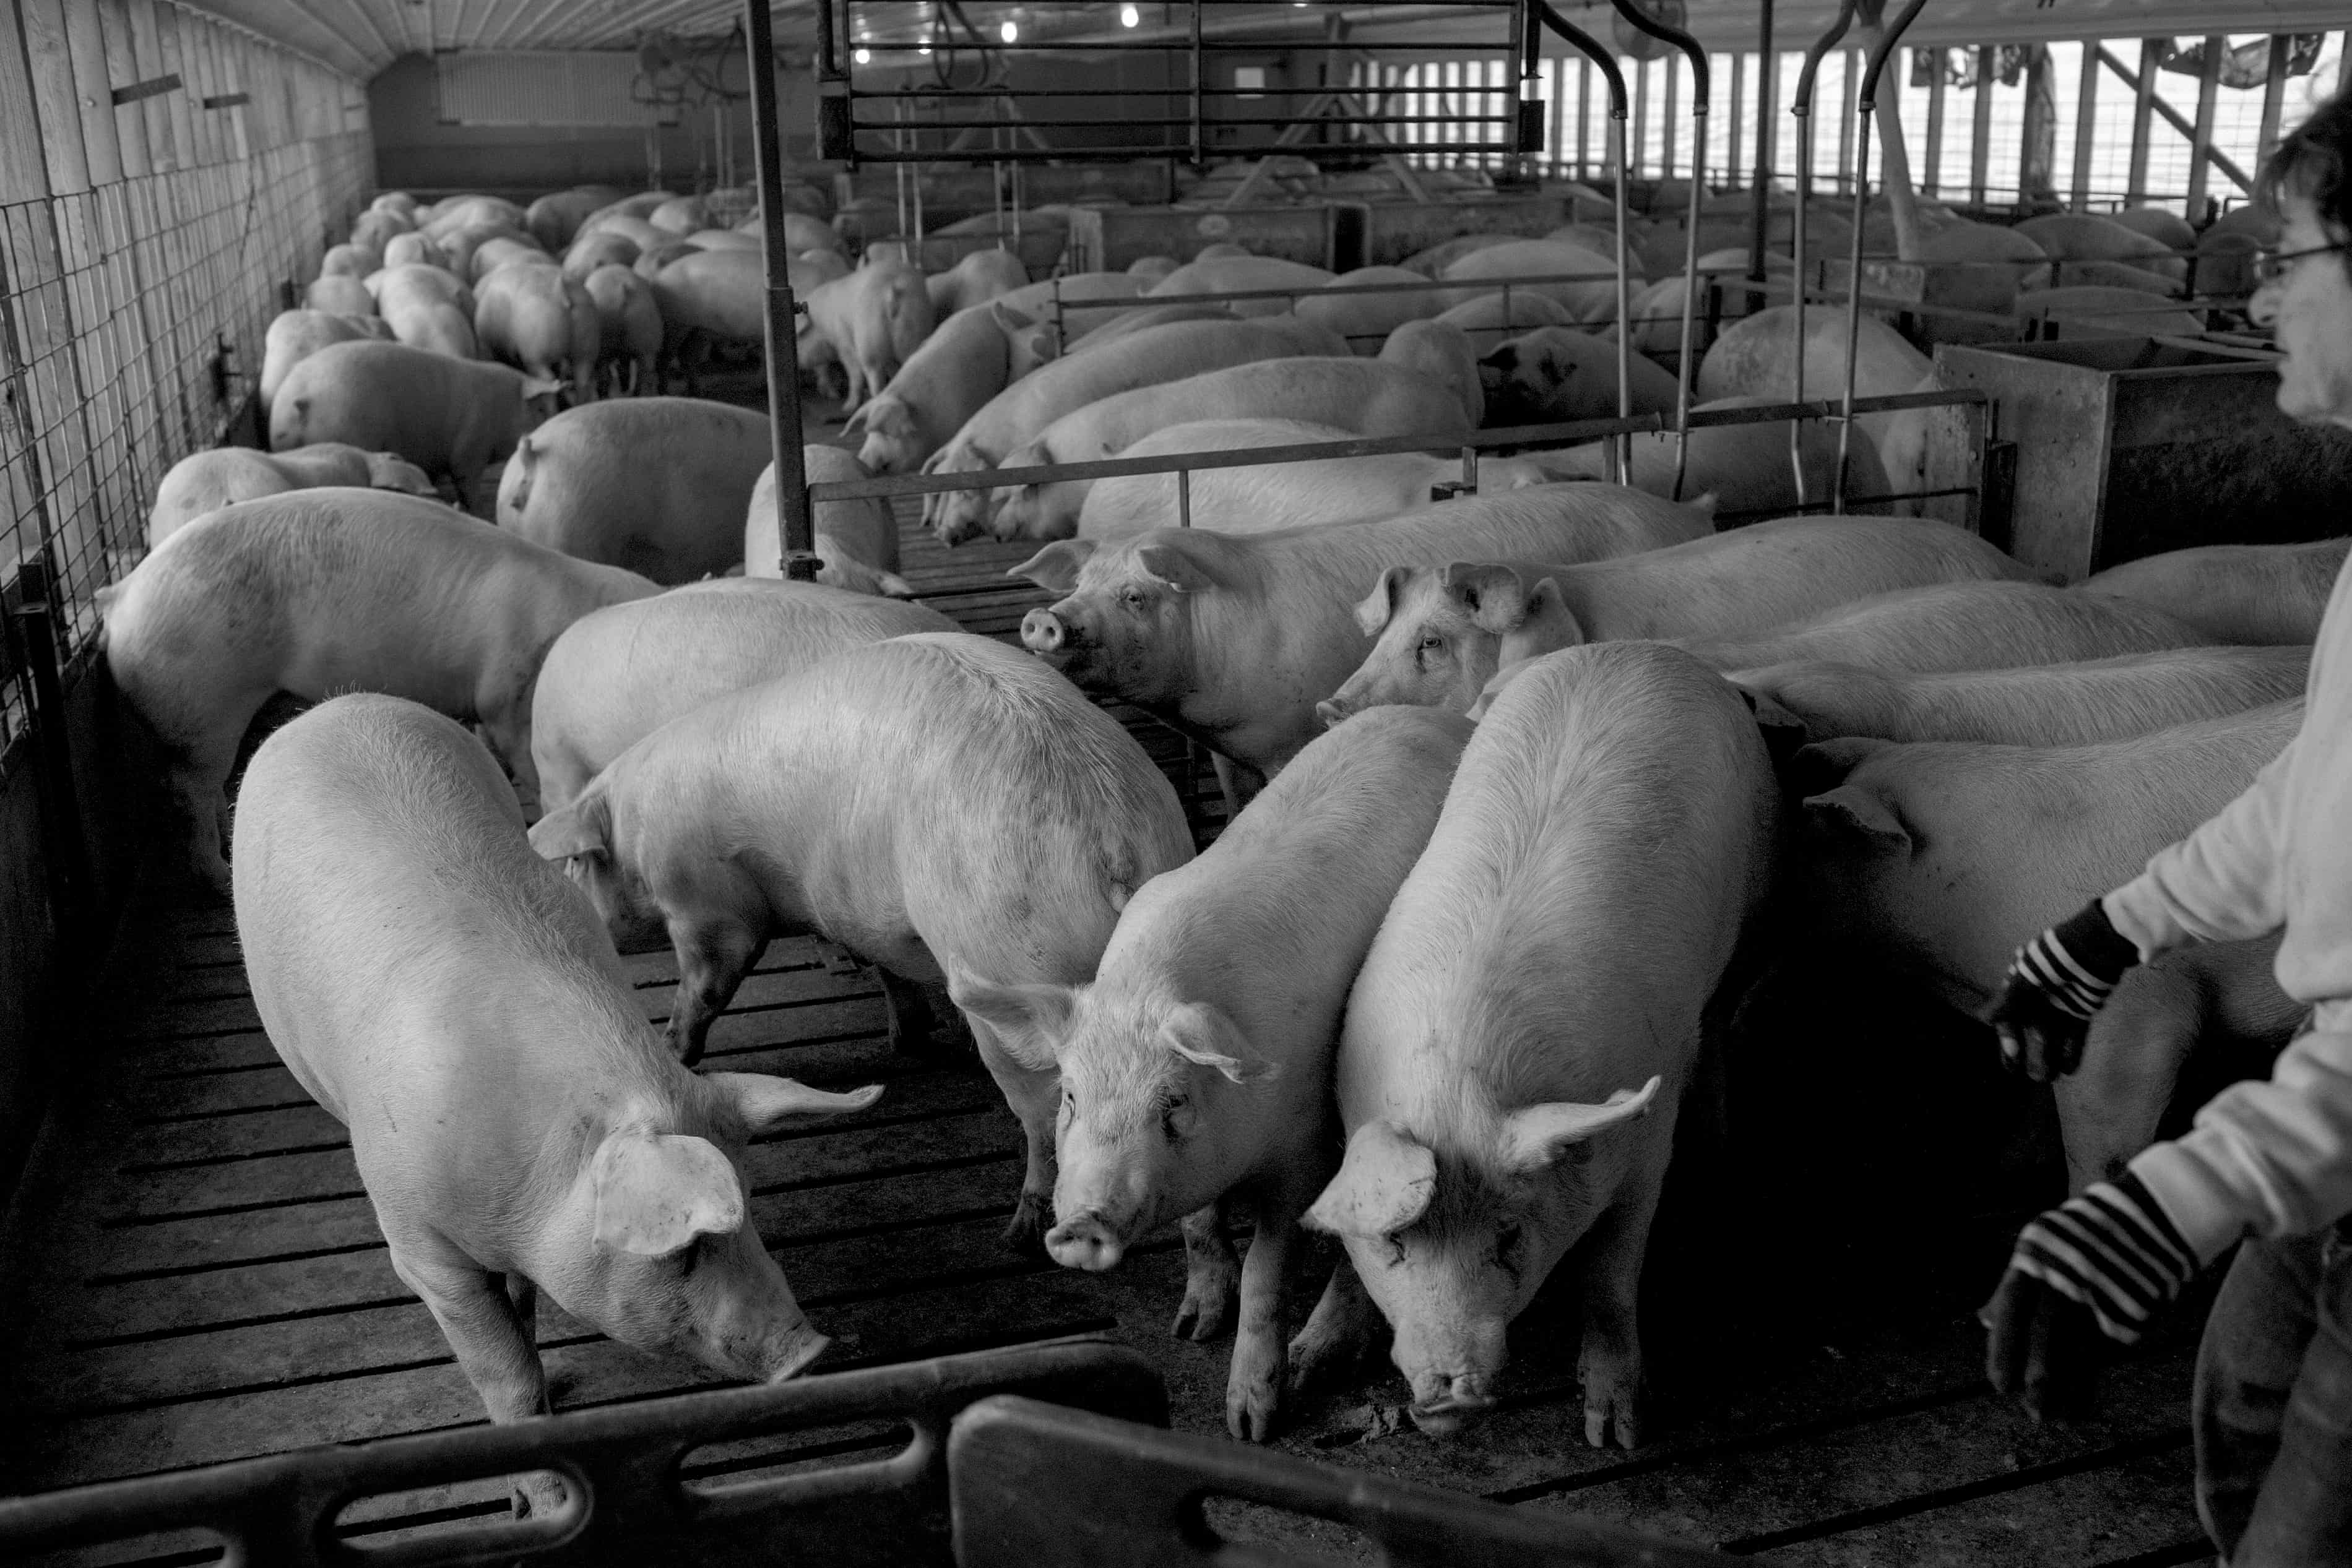 ‘Towns just turned to dust’: how factory hog farms help hollow out rural communities (theguardian.com)